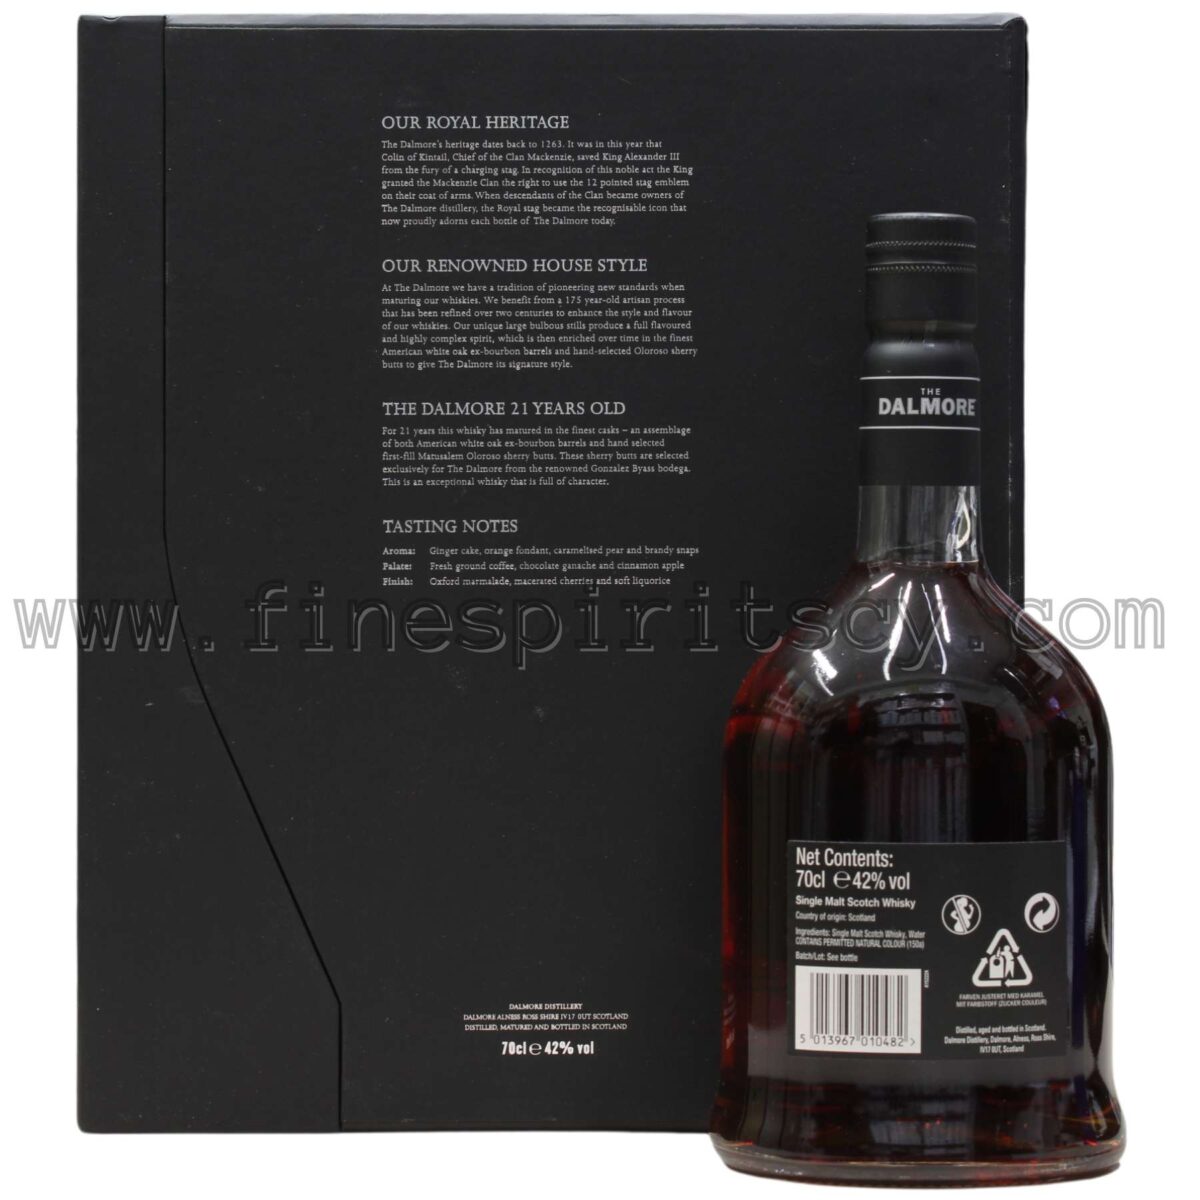 The Dalmore 21 Year Old Scotch Whisky Box Bottle Back Rear Side Tasting Notes